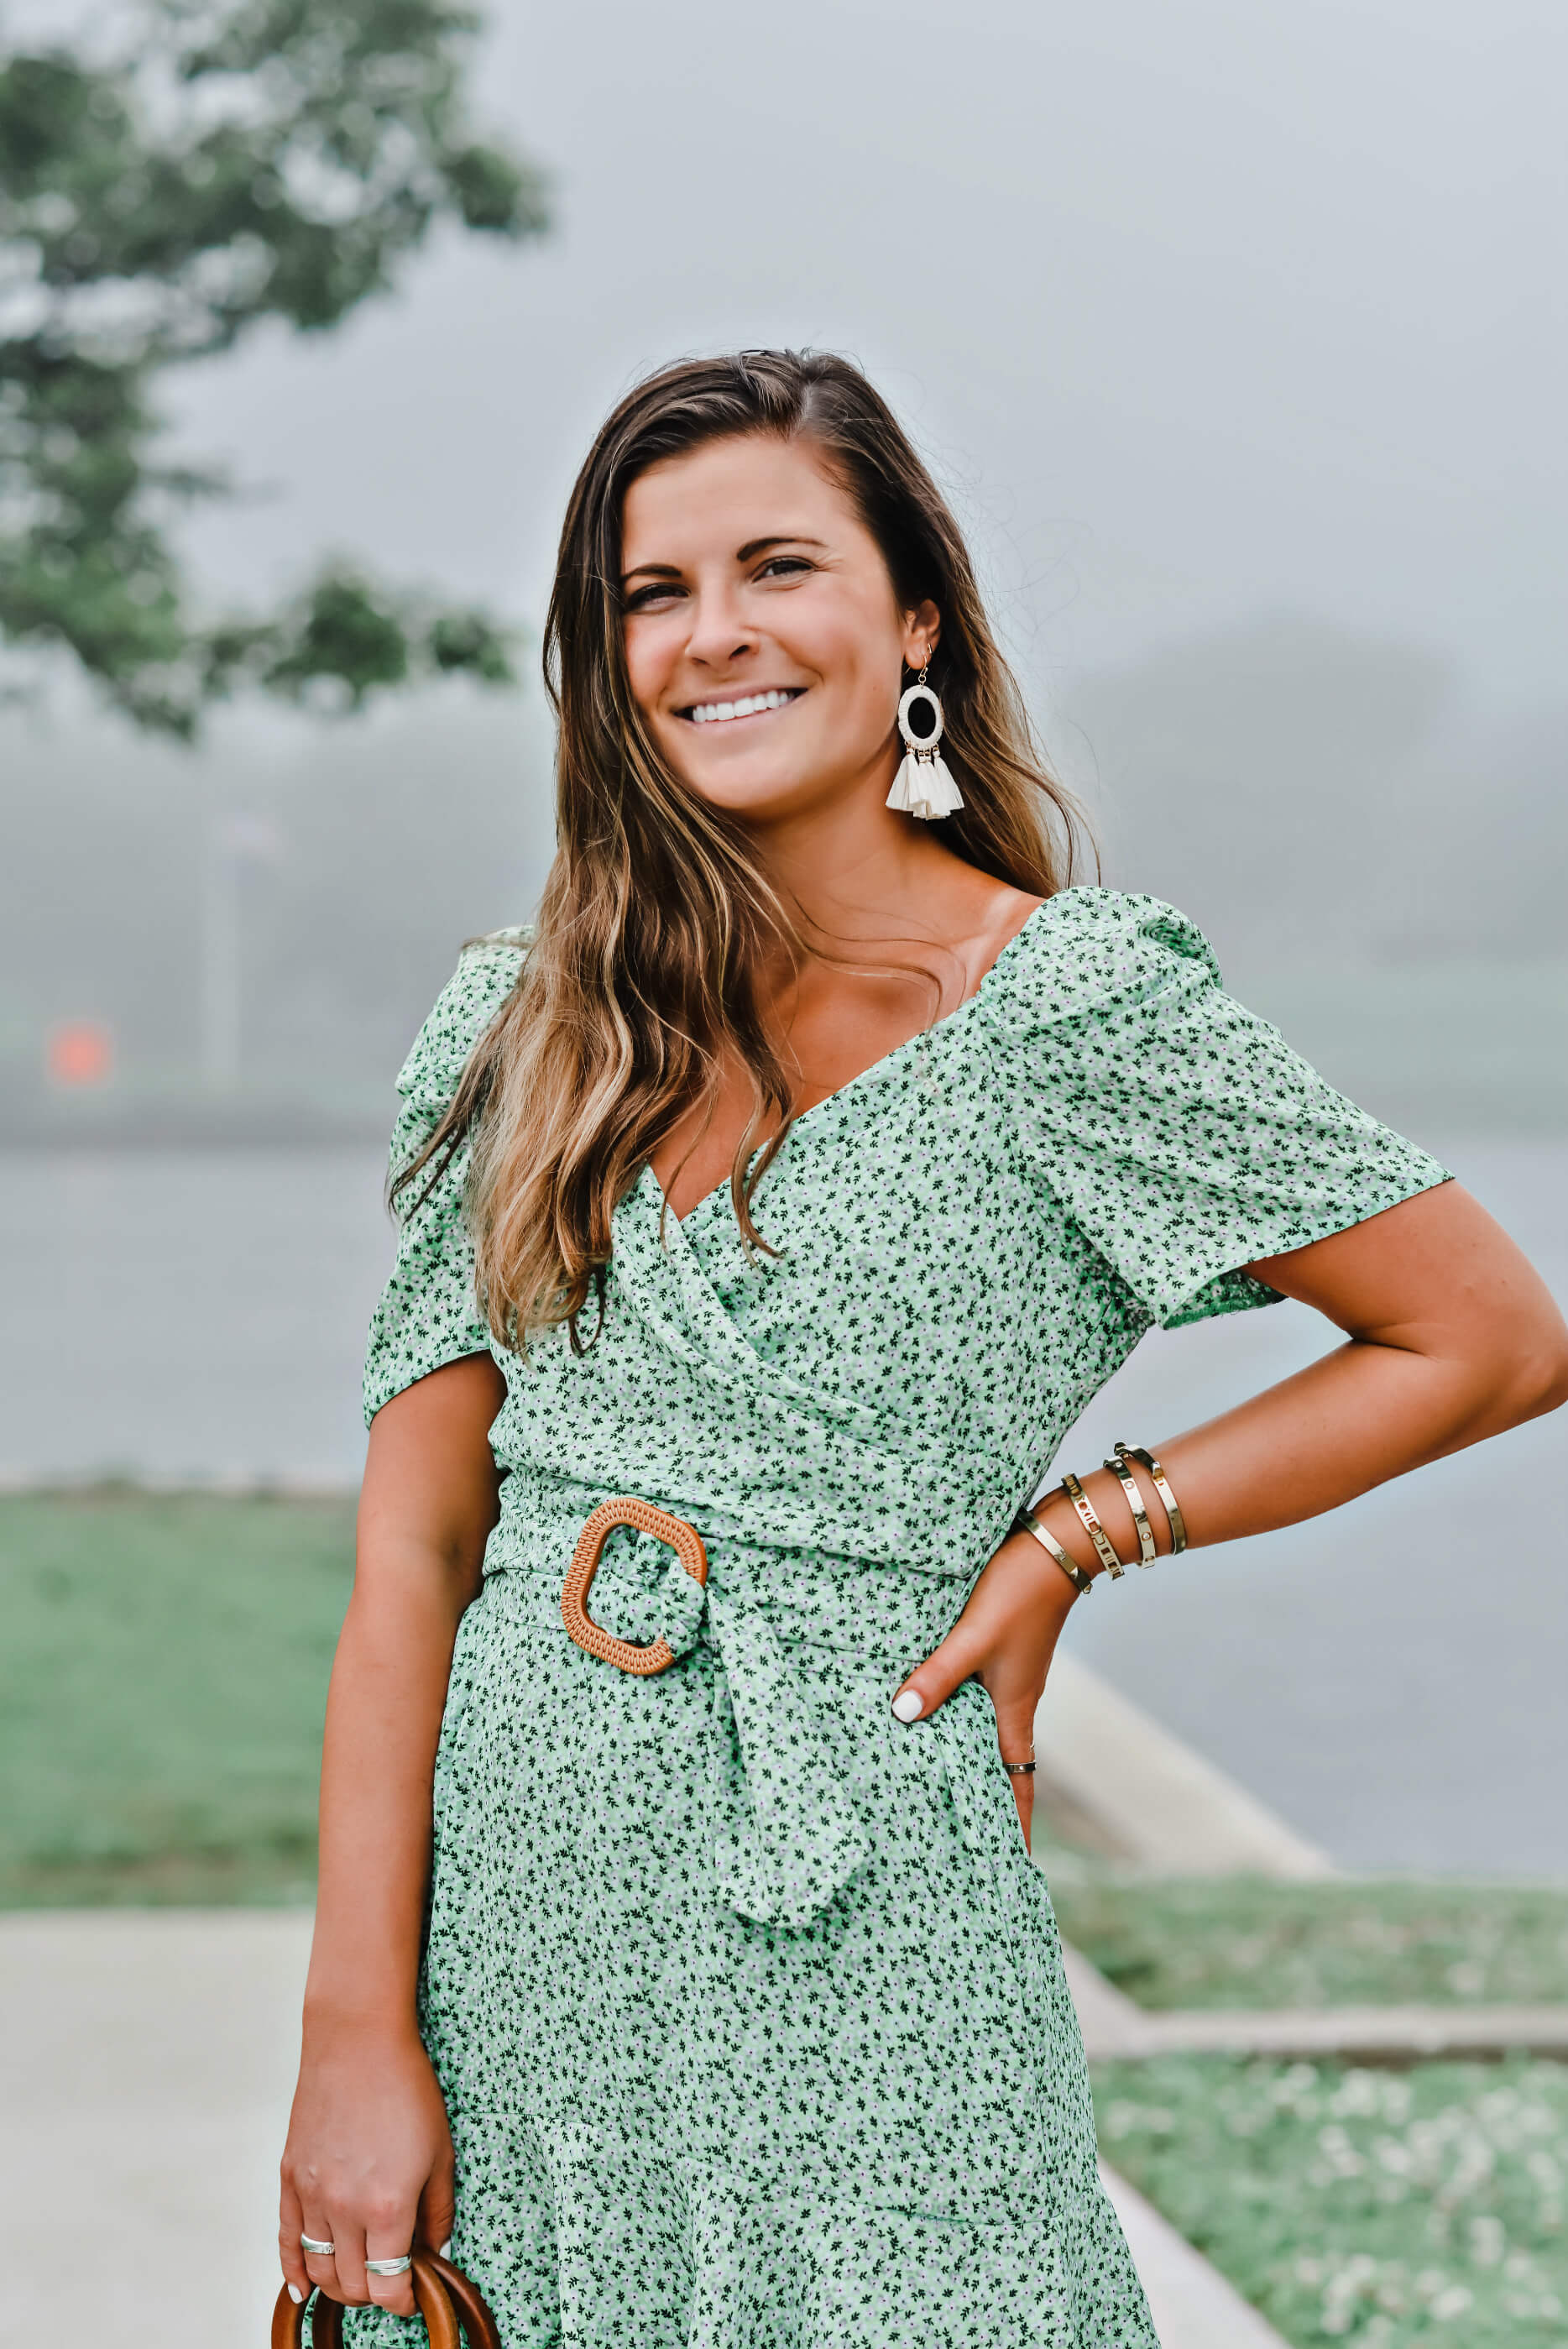 ASOS Green wrap double layer mini dress in ditsy floral print with belt, Francesca's White Tassel Earrings, Summer Dress, Summer Style, Tilden of To Be Bright